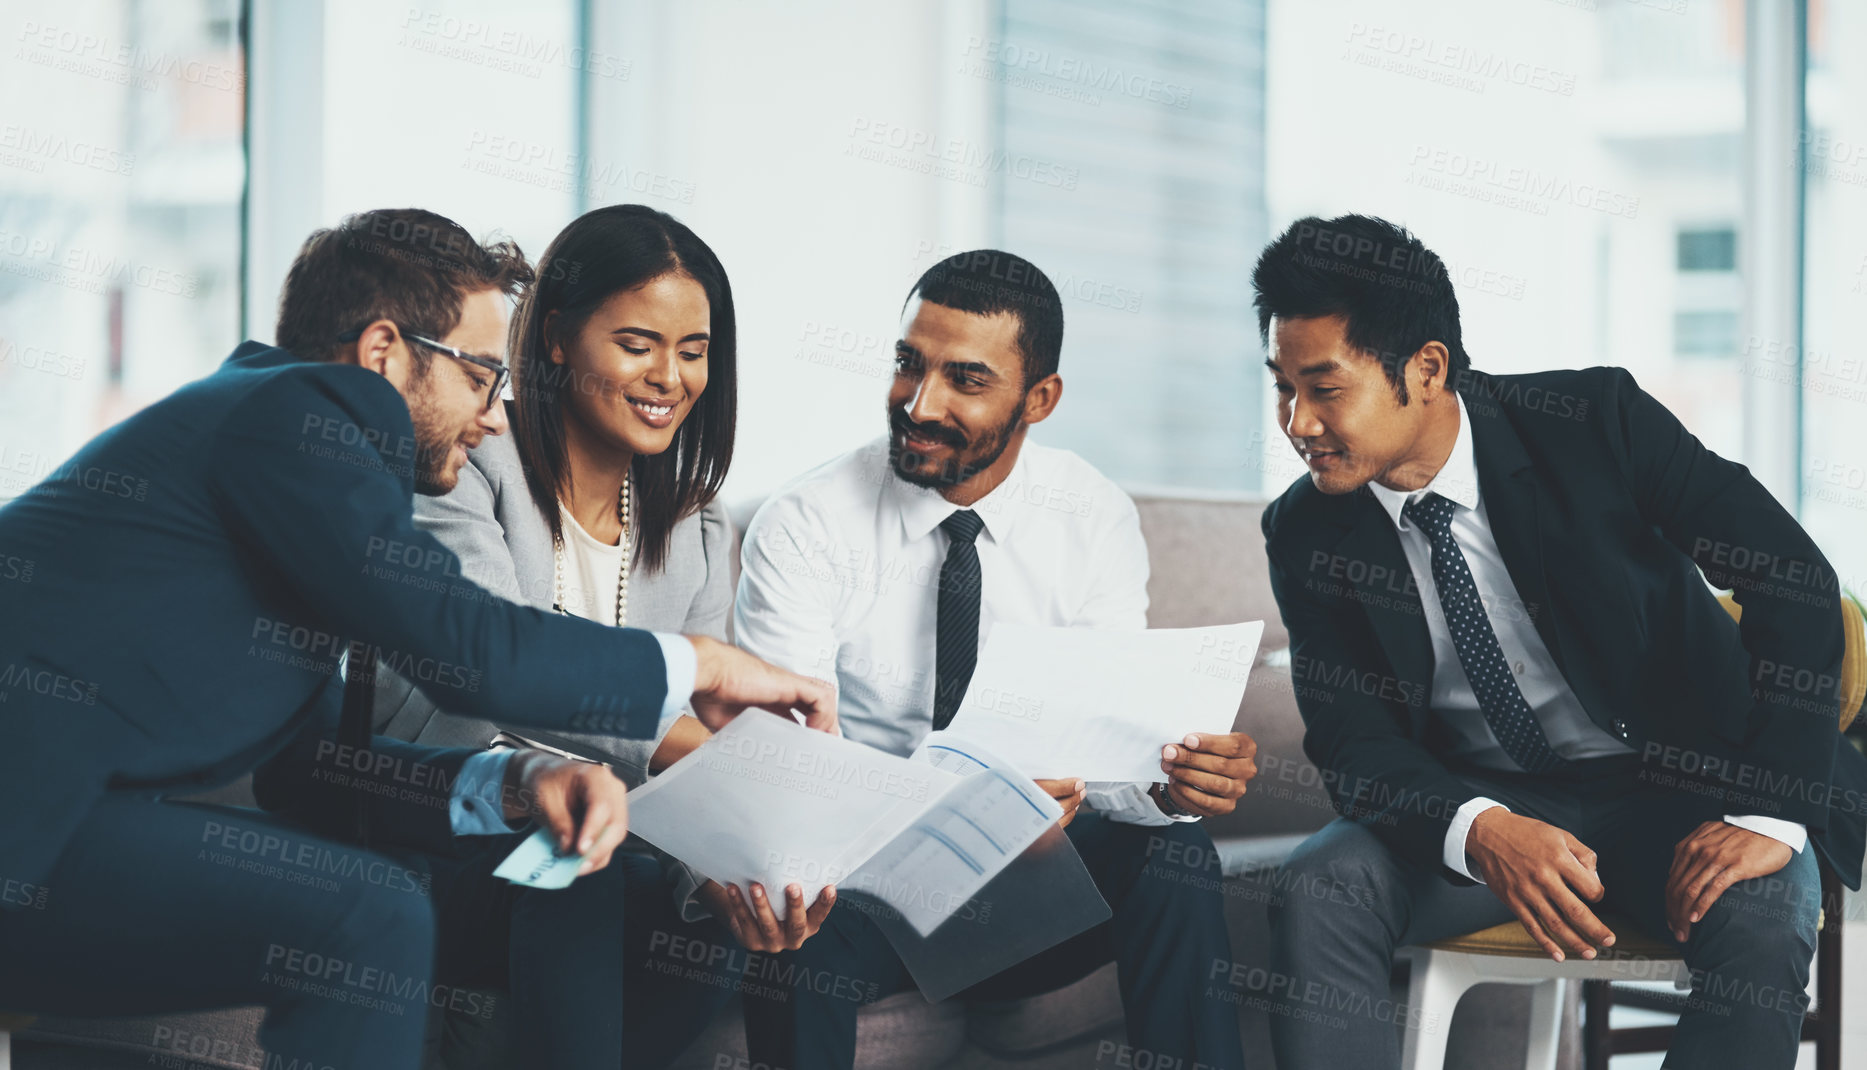 Buy stock photo Shot of a group of businesspeople discussing paperwork while sitting together